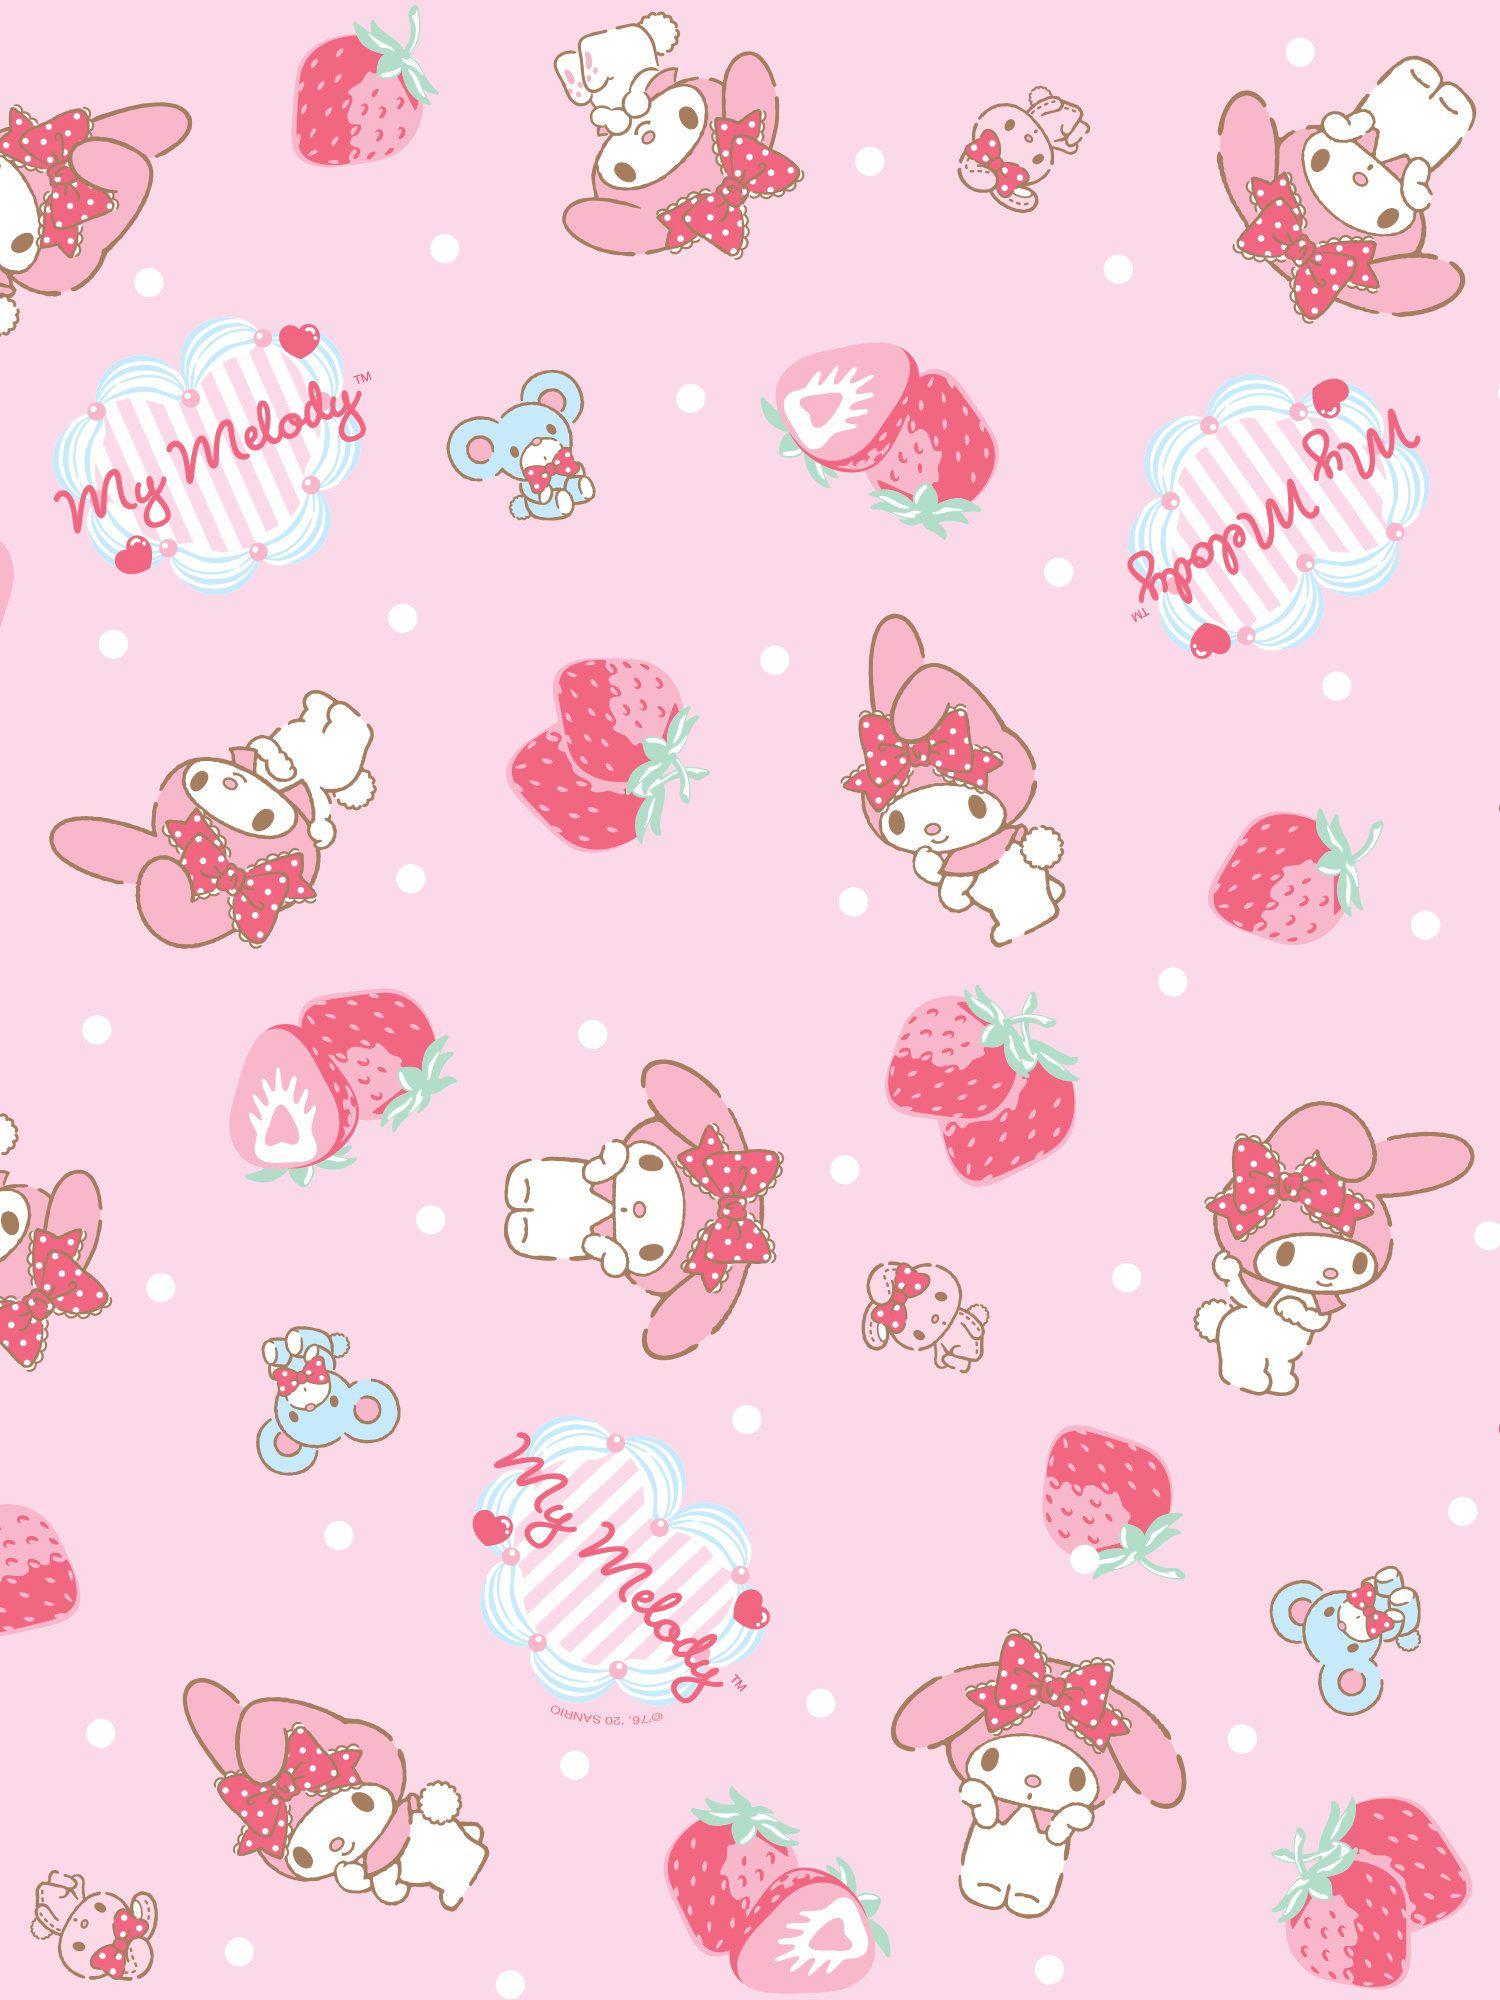 My Melody Kuromi Wallpapers - Boots For Women